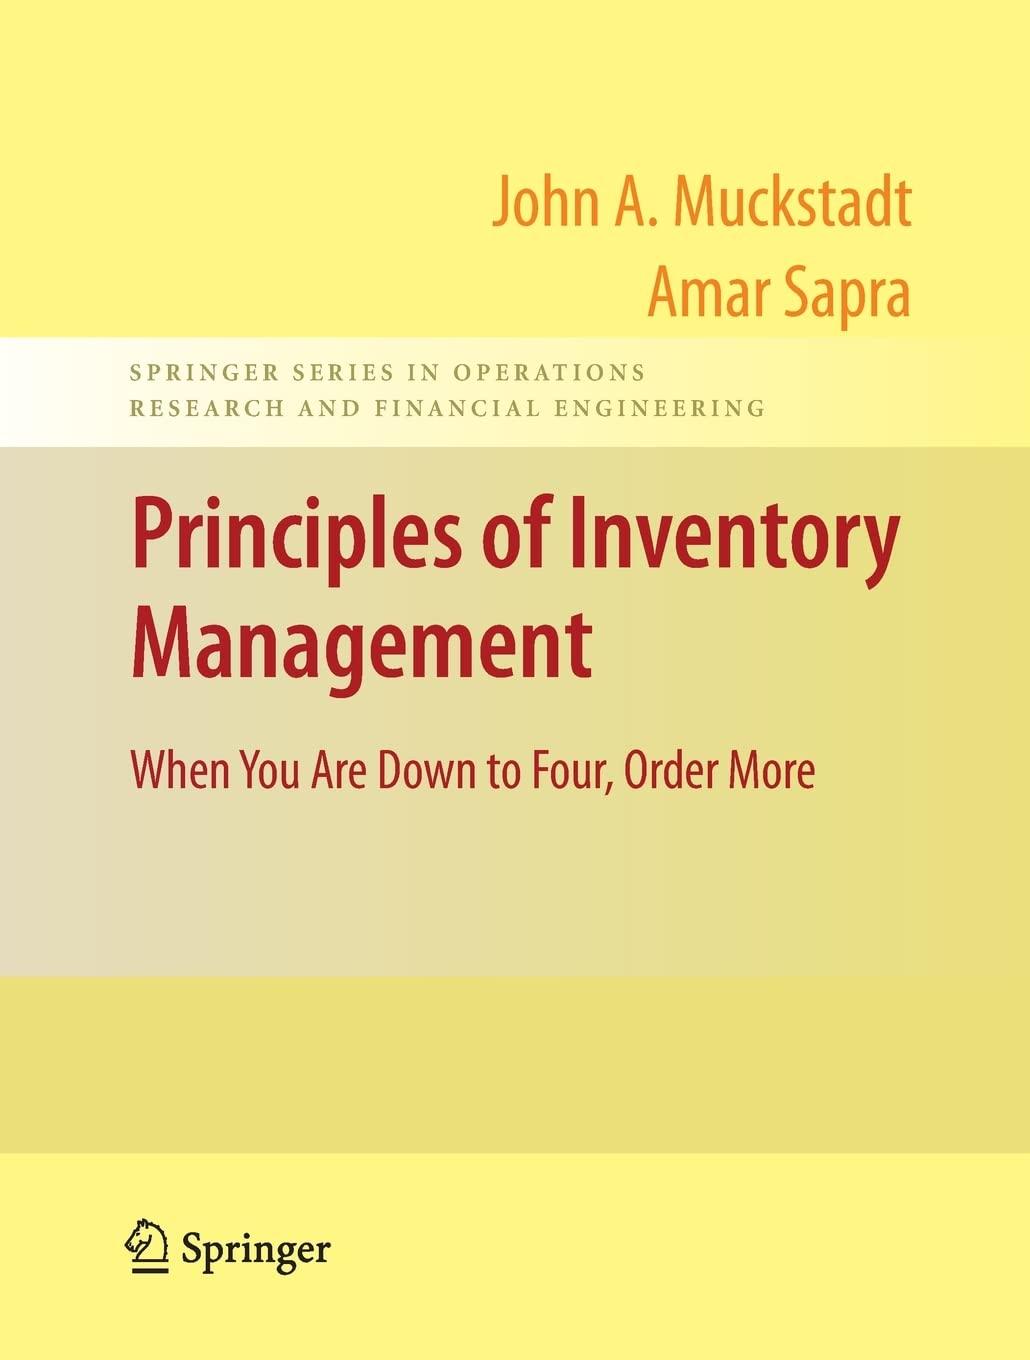 principles of inventory management when you are down to four order more 1st edition john a. muckstadt, amar